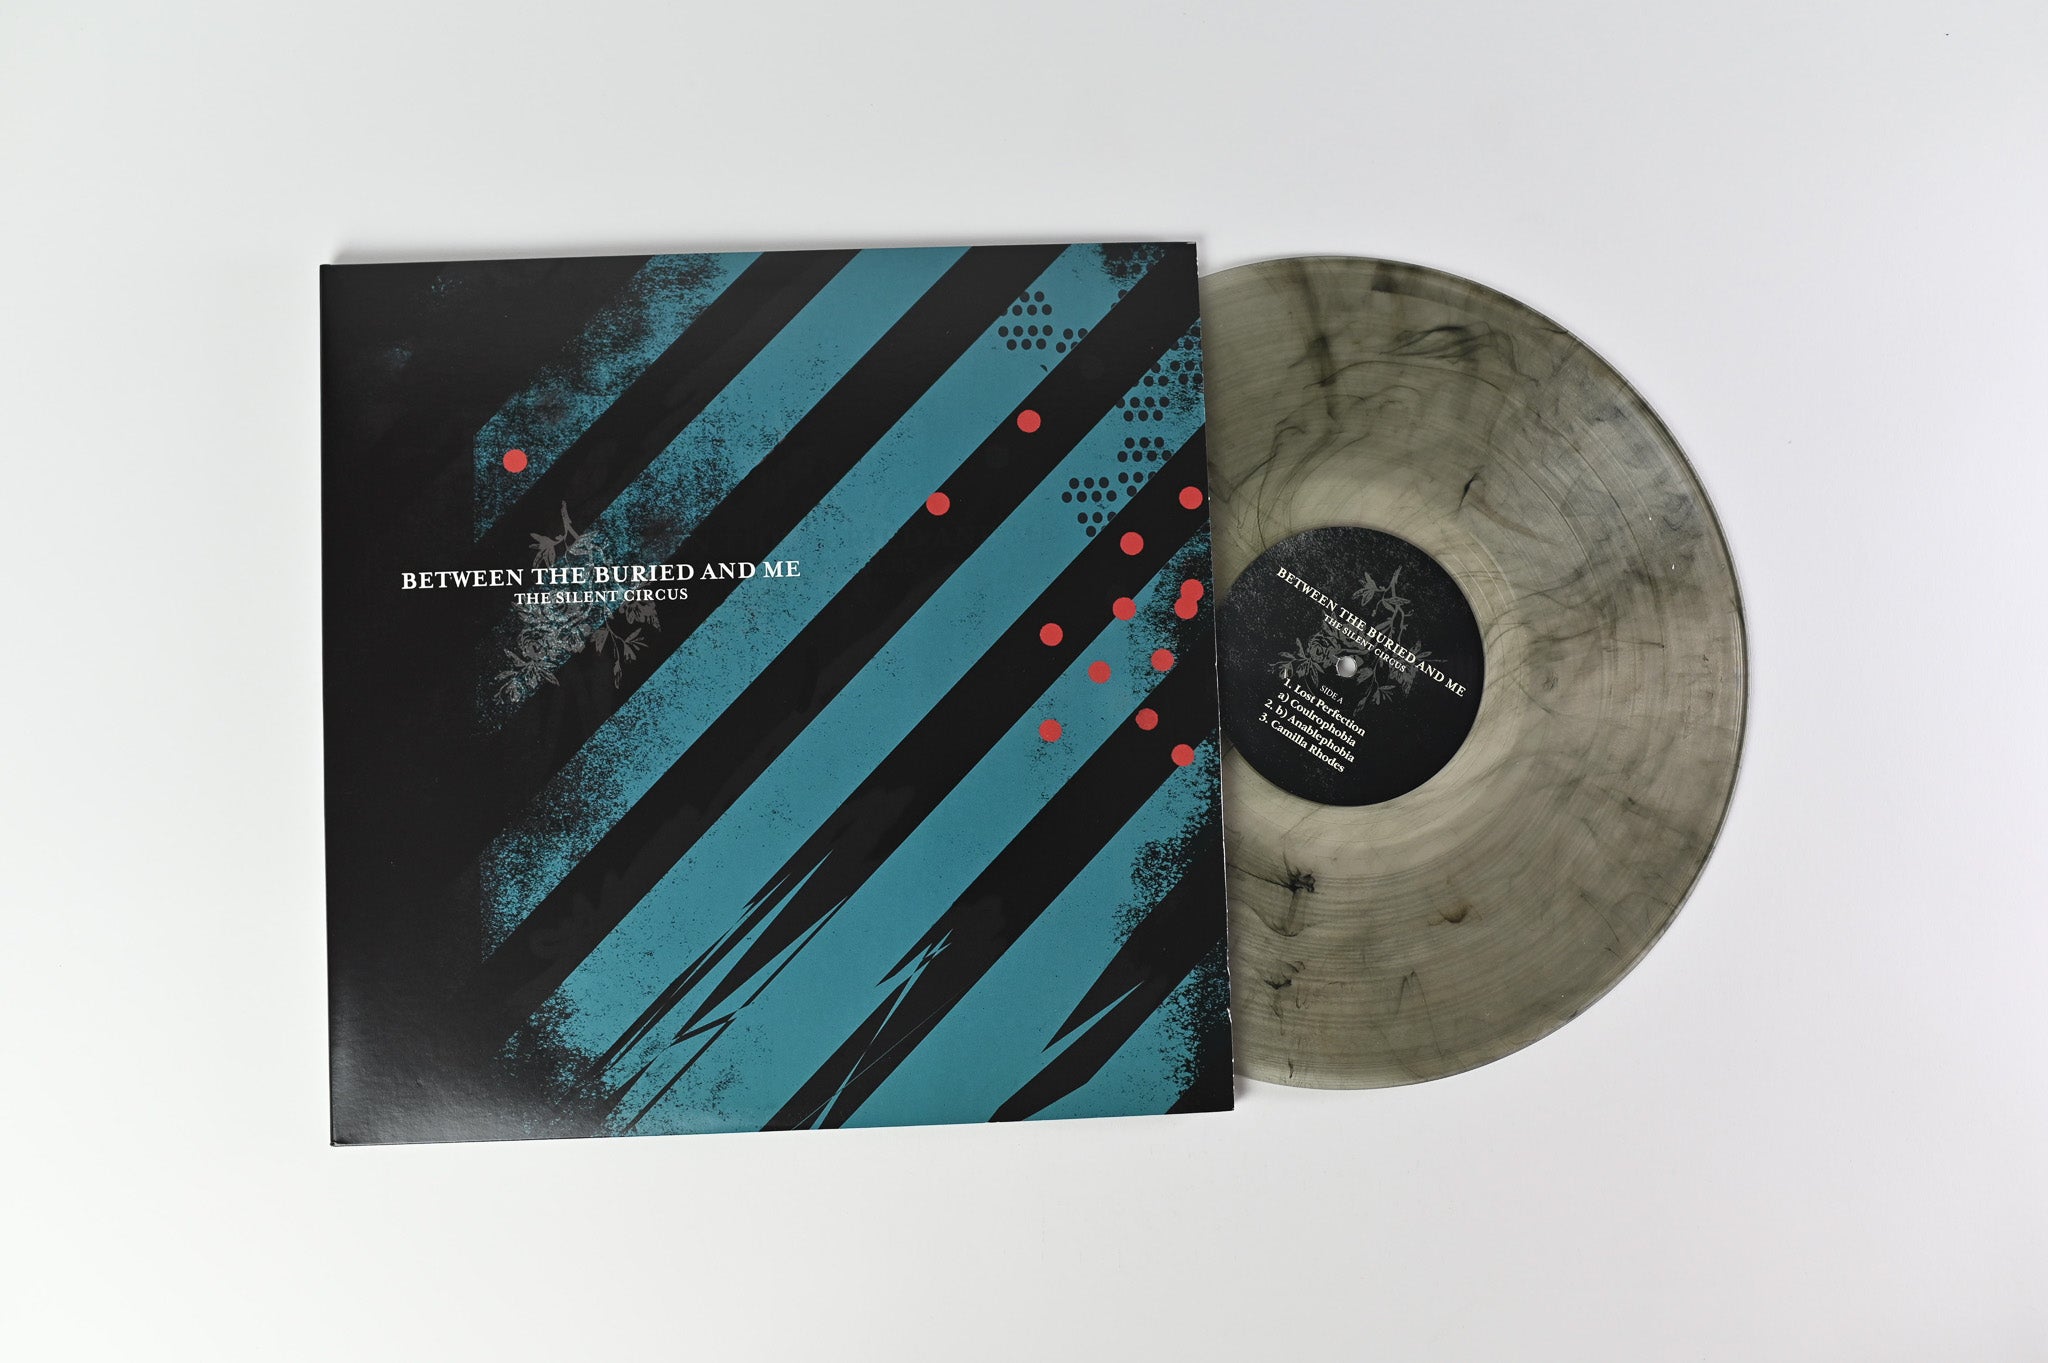 Between The Buried And Me - The Silent Circus on Victory Ltd Clear Black Smoke Repress